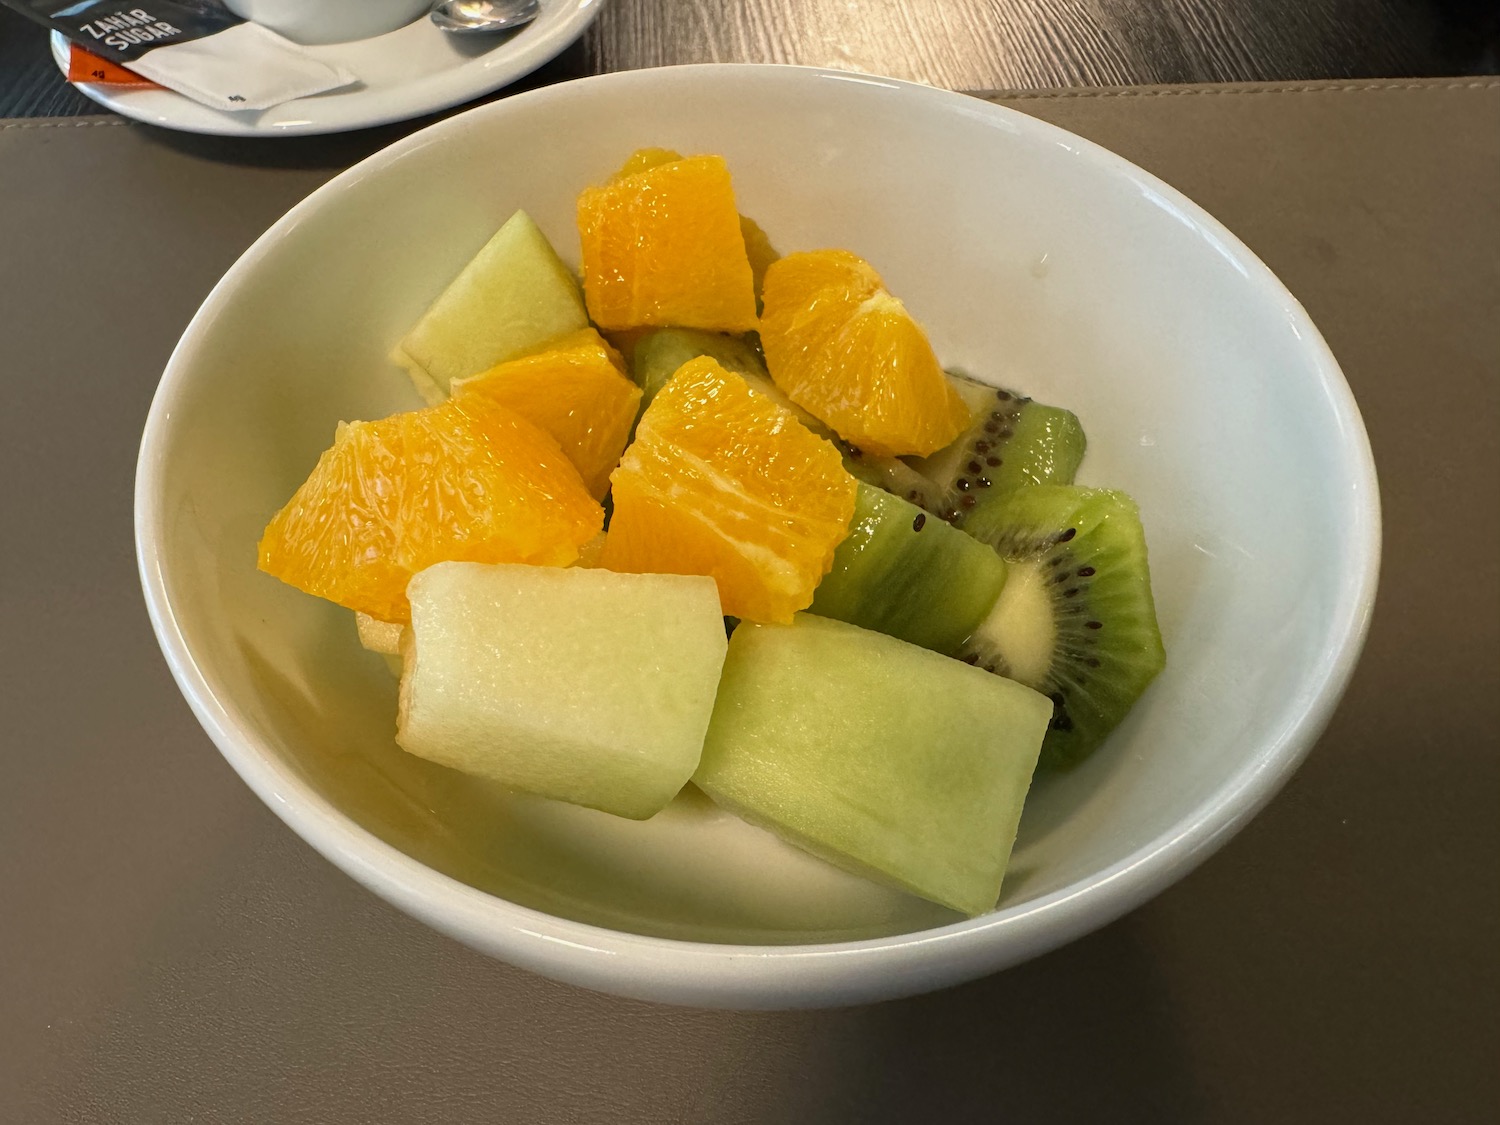 a bowl of fruit on a table